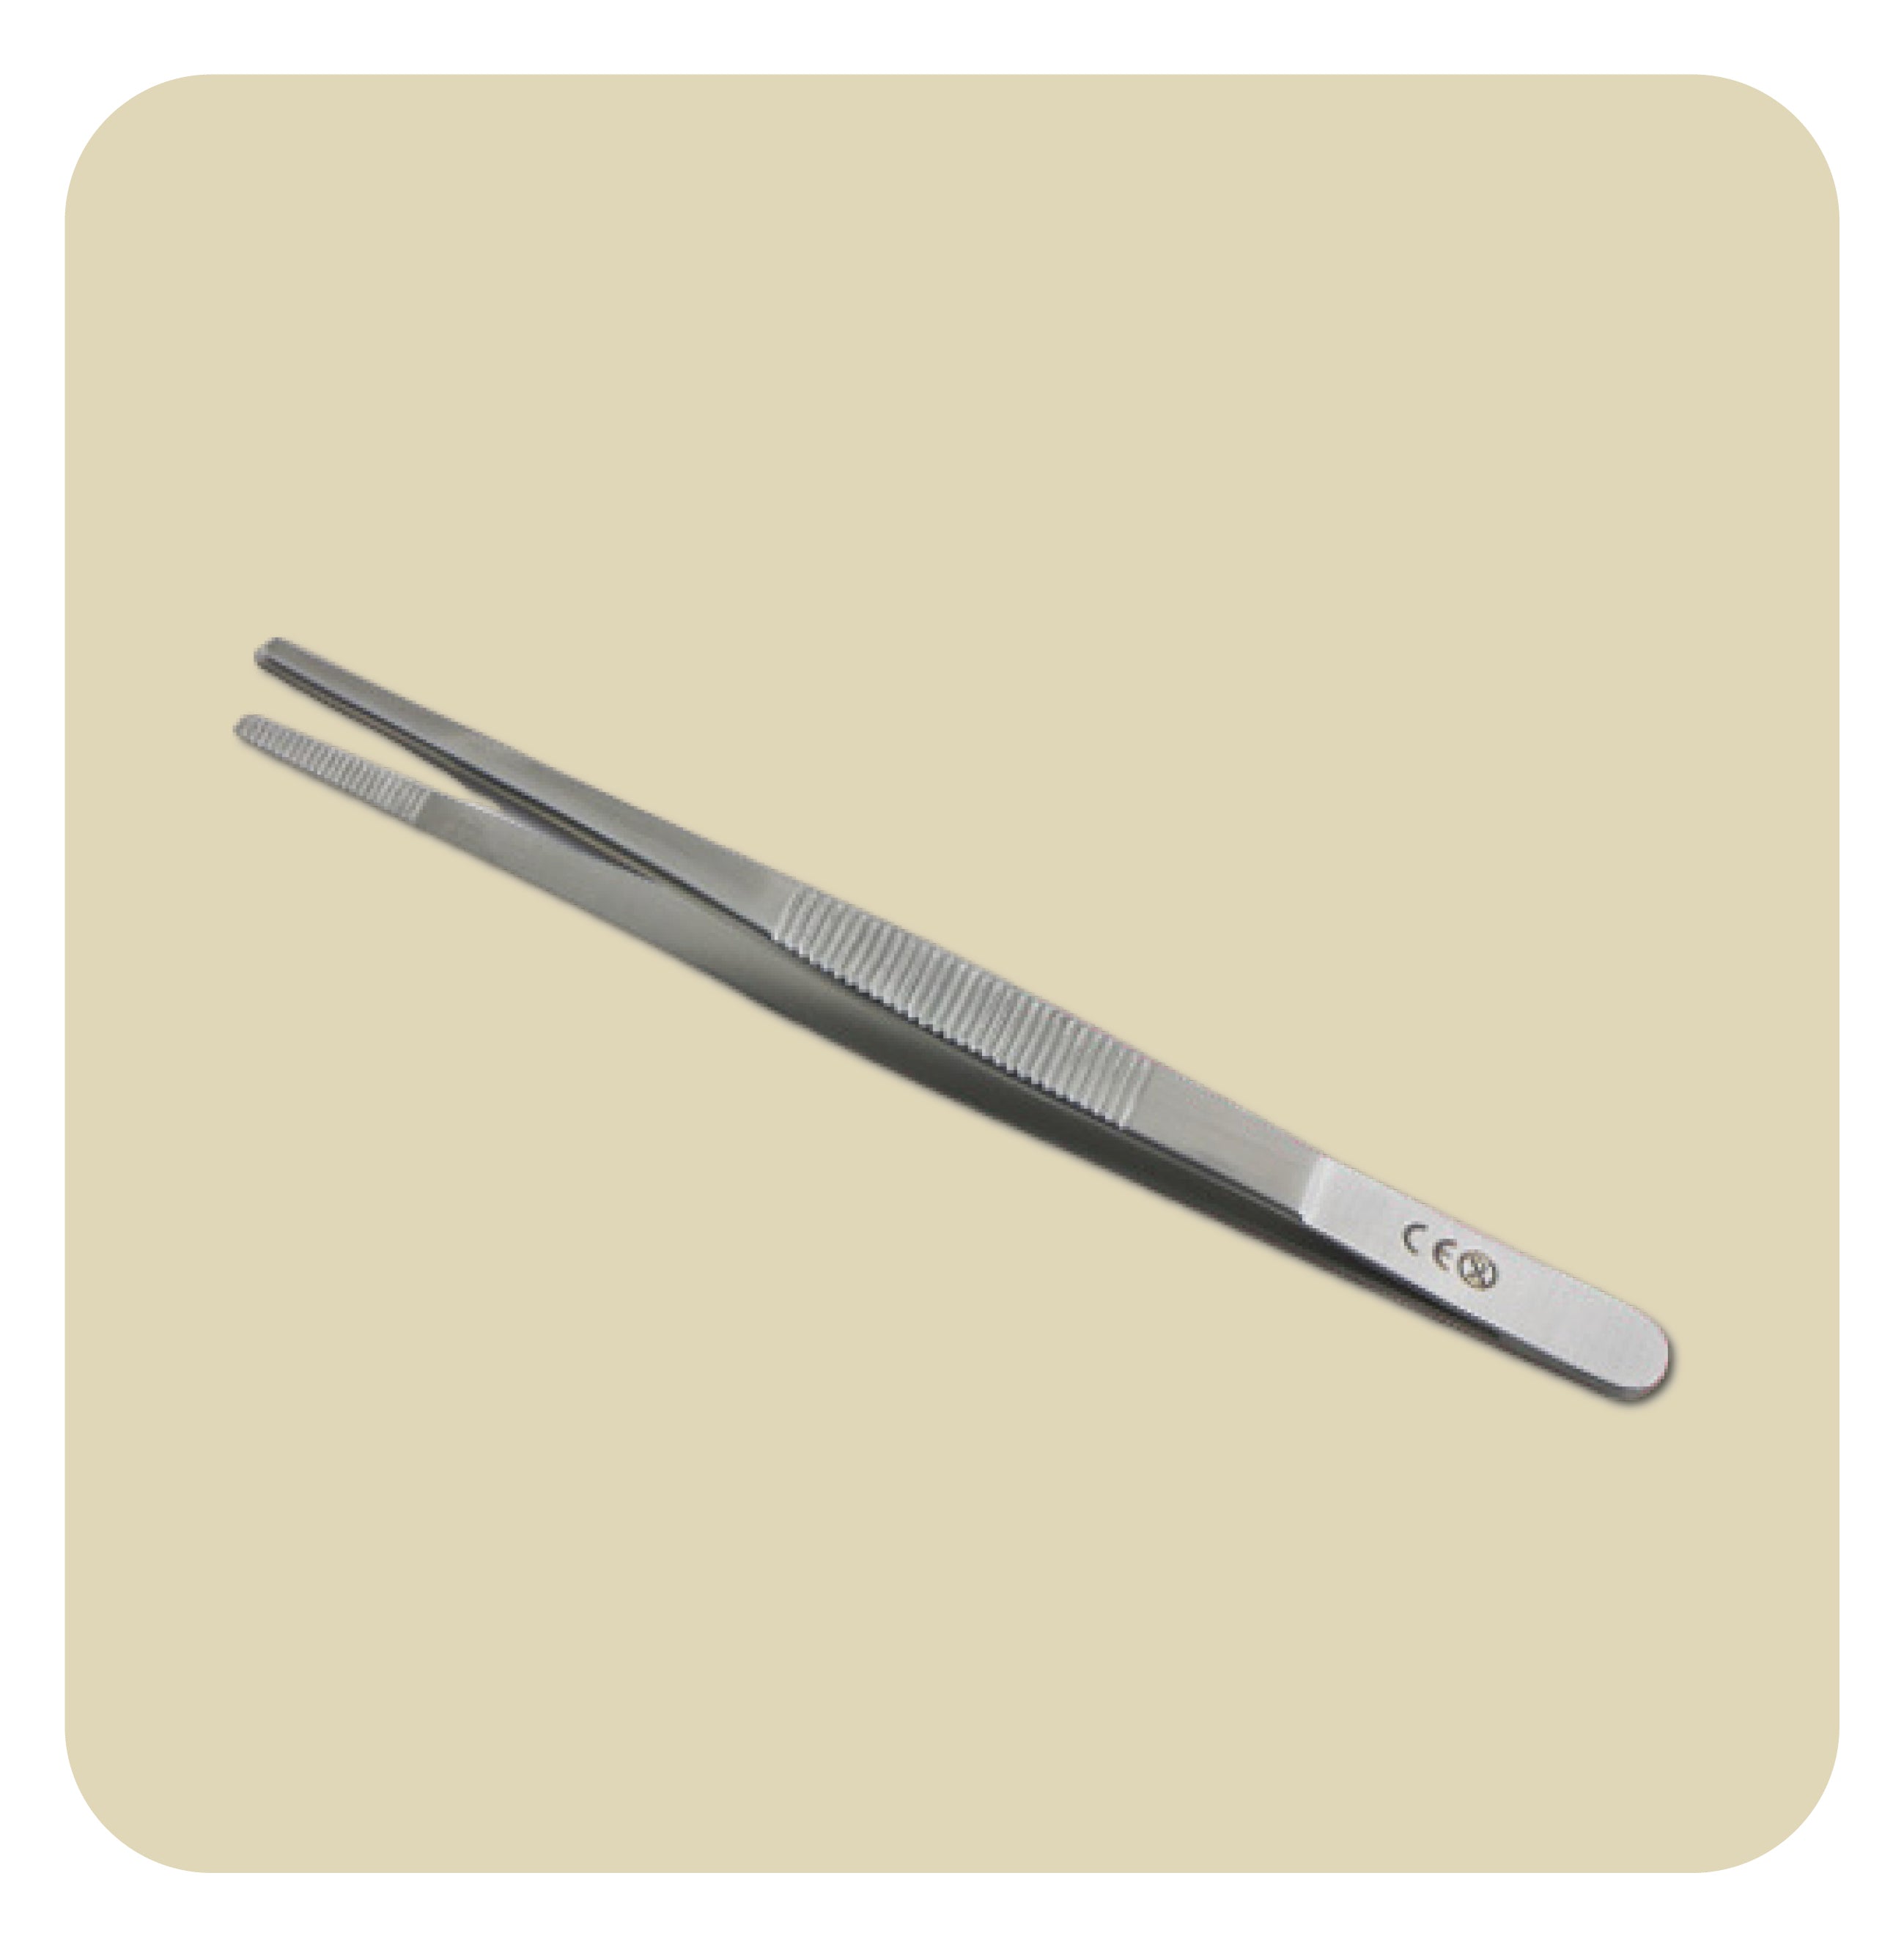 Sterile single-use stainless steel dissecting forceps without claws 10 cm